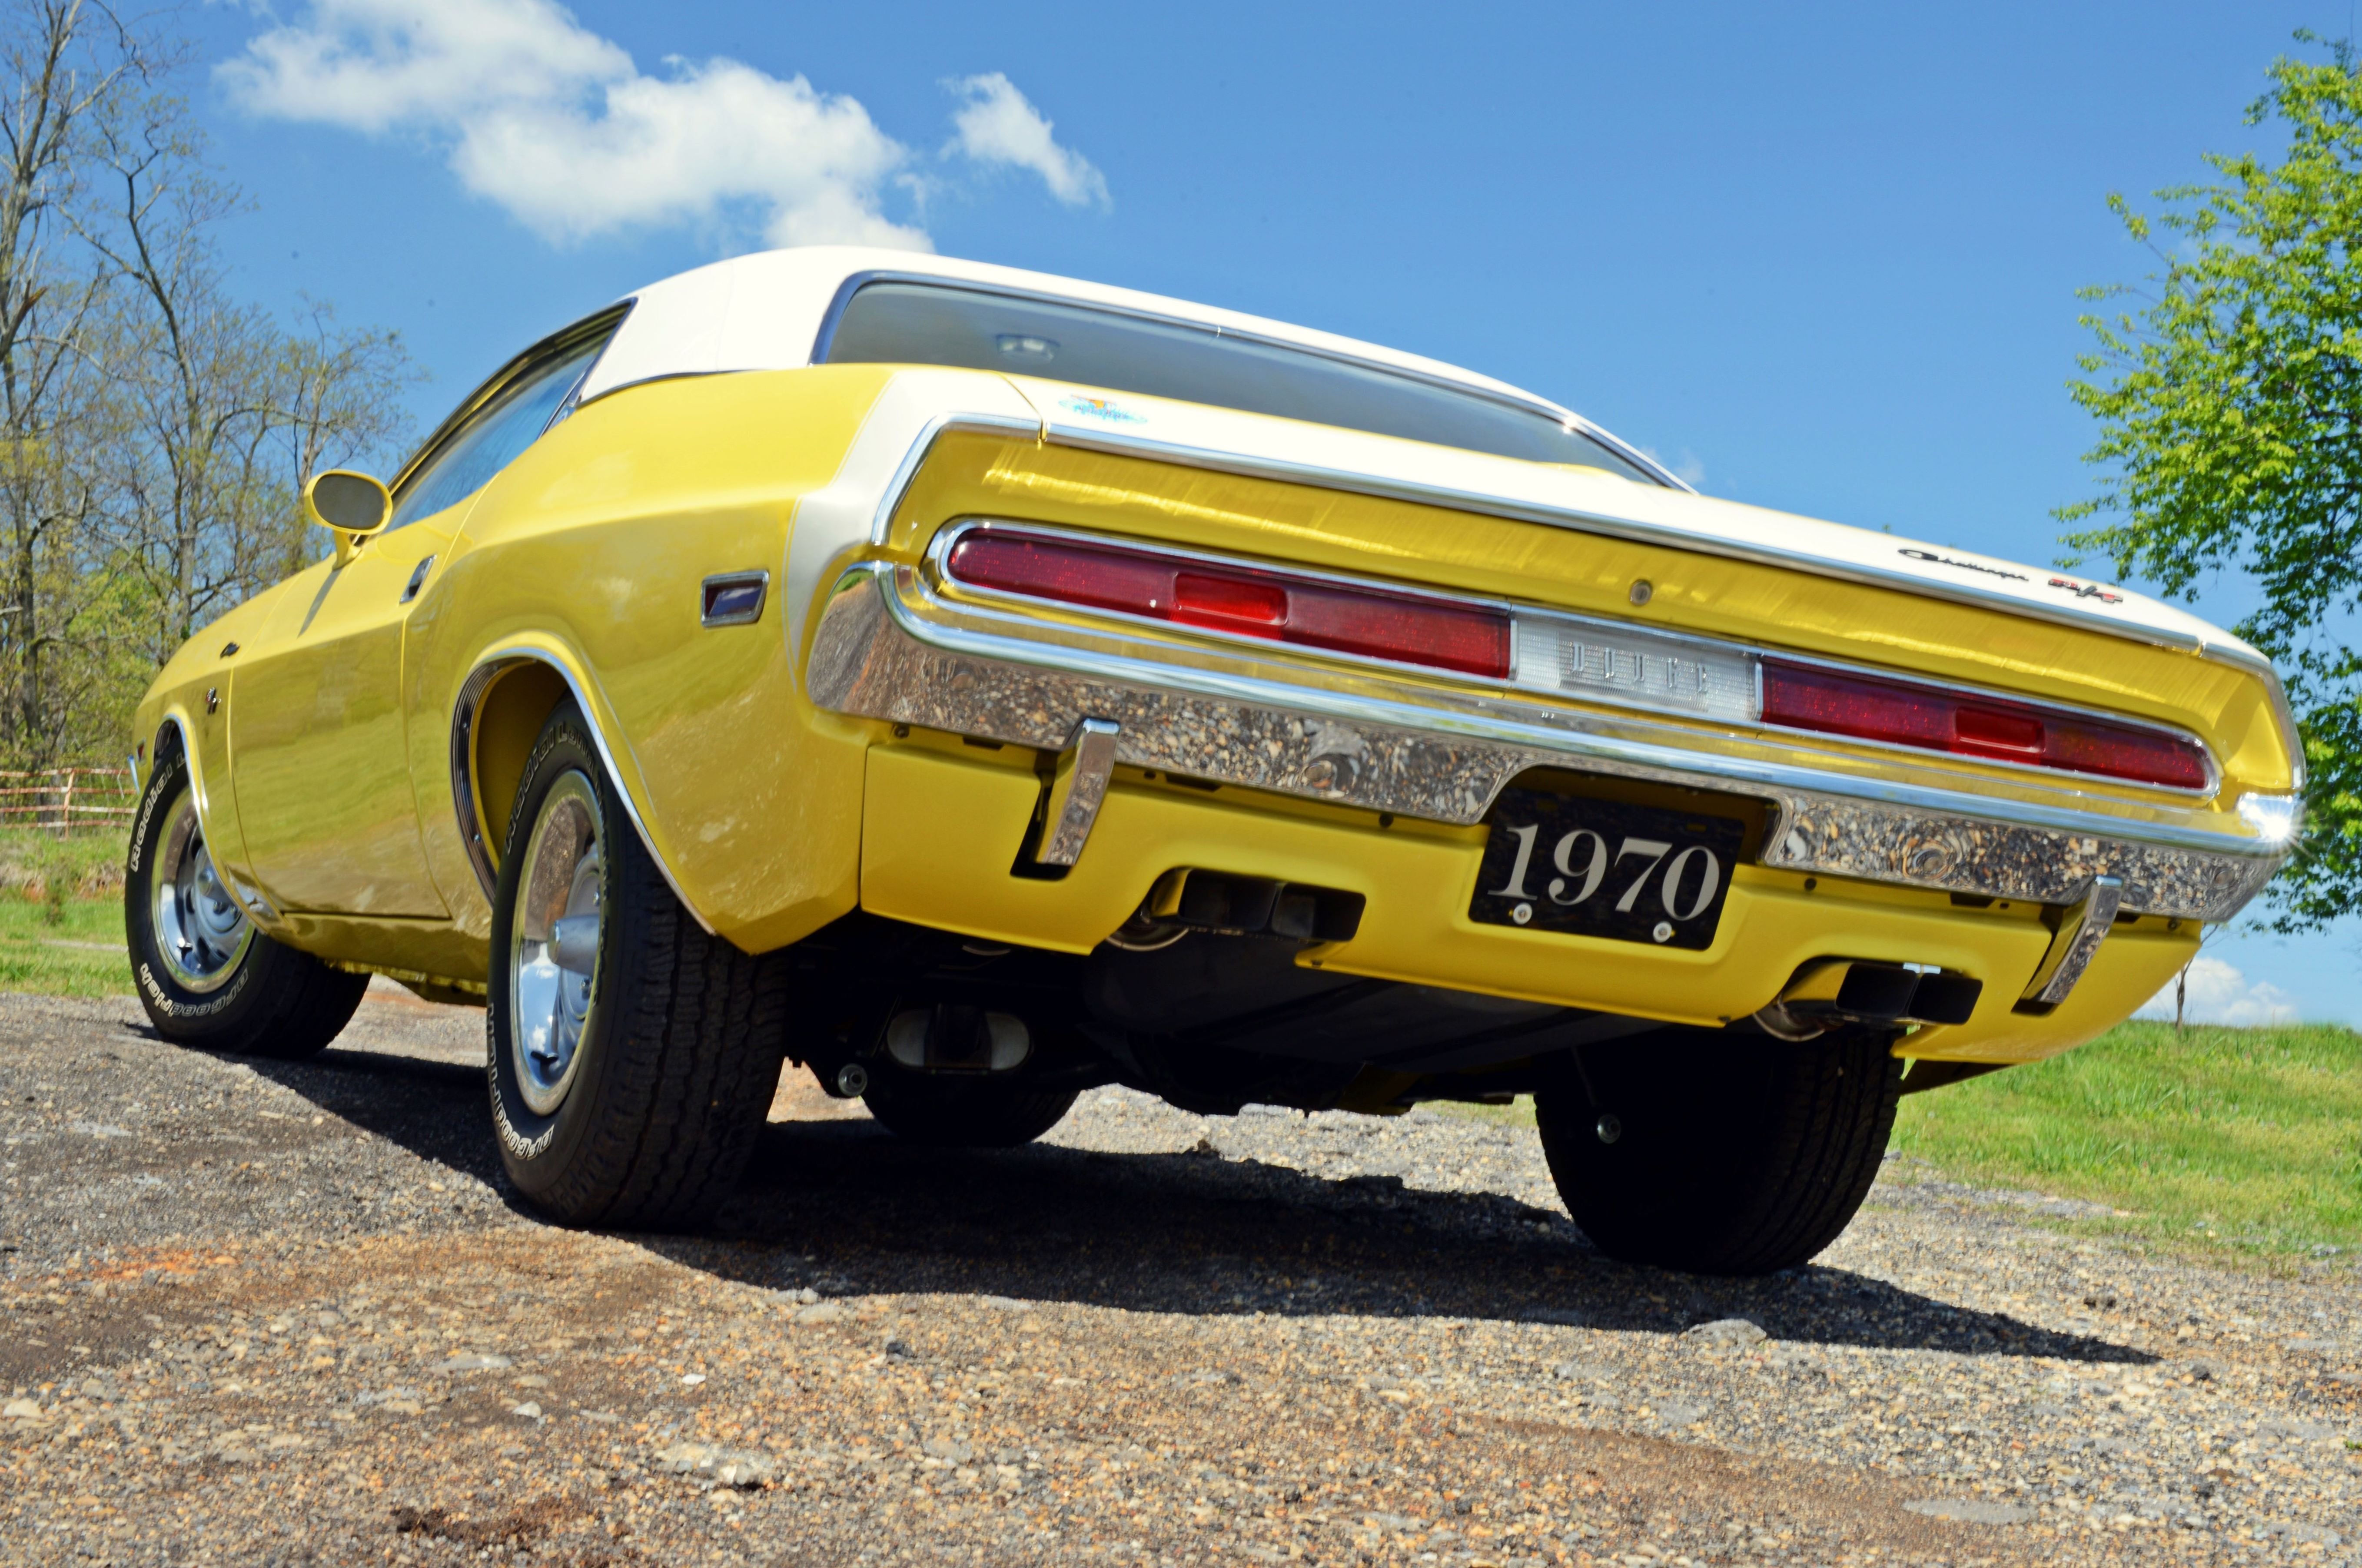 1970, Dodge, Challenger, Rt, Muscle, Classic, Old, Original, Yellow, Usa, 5435x3610 02 Wallpaper